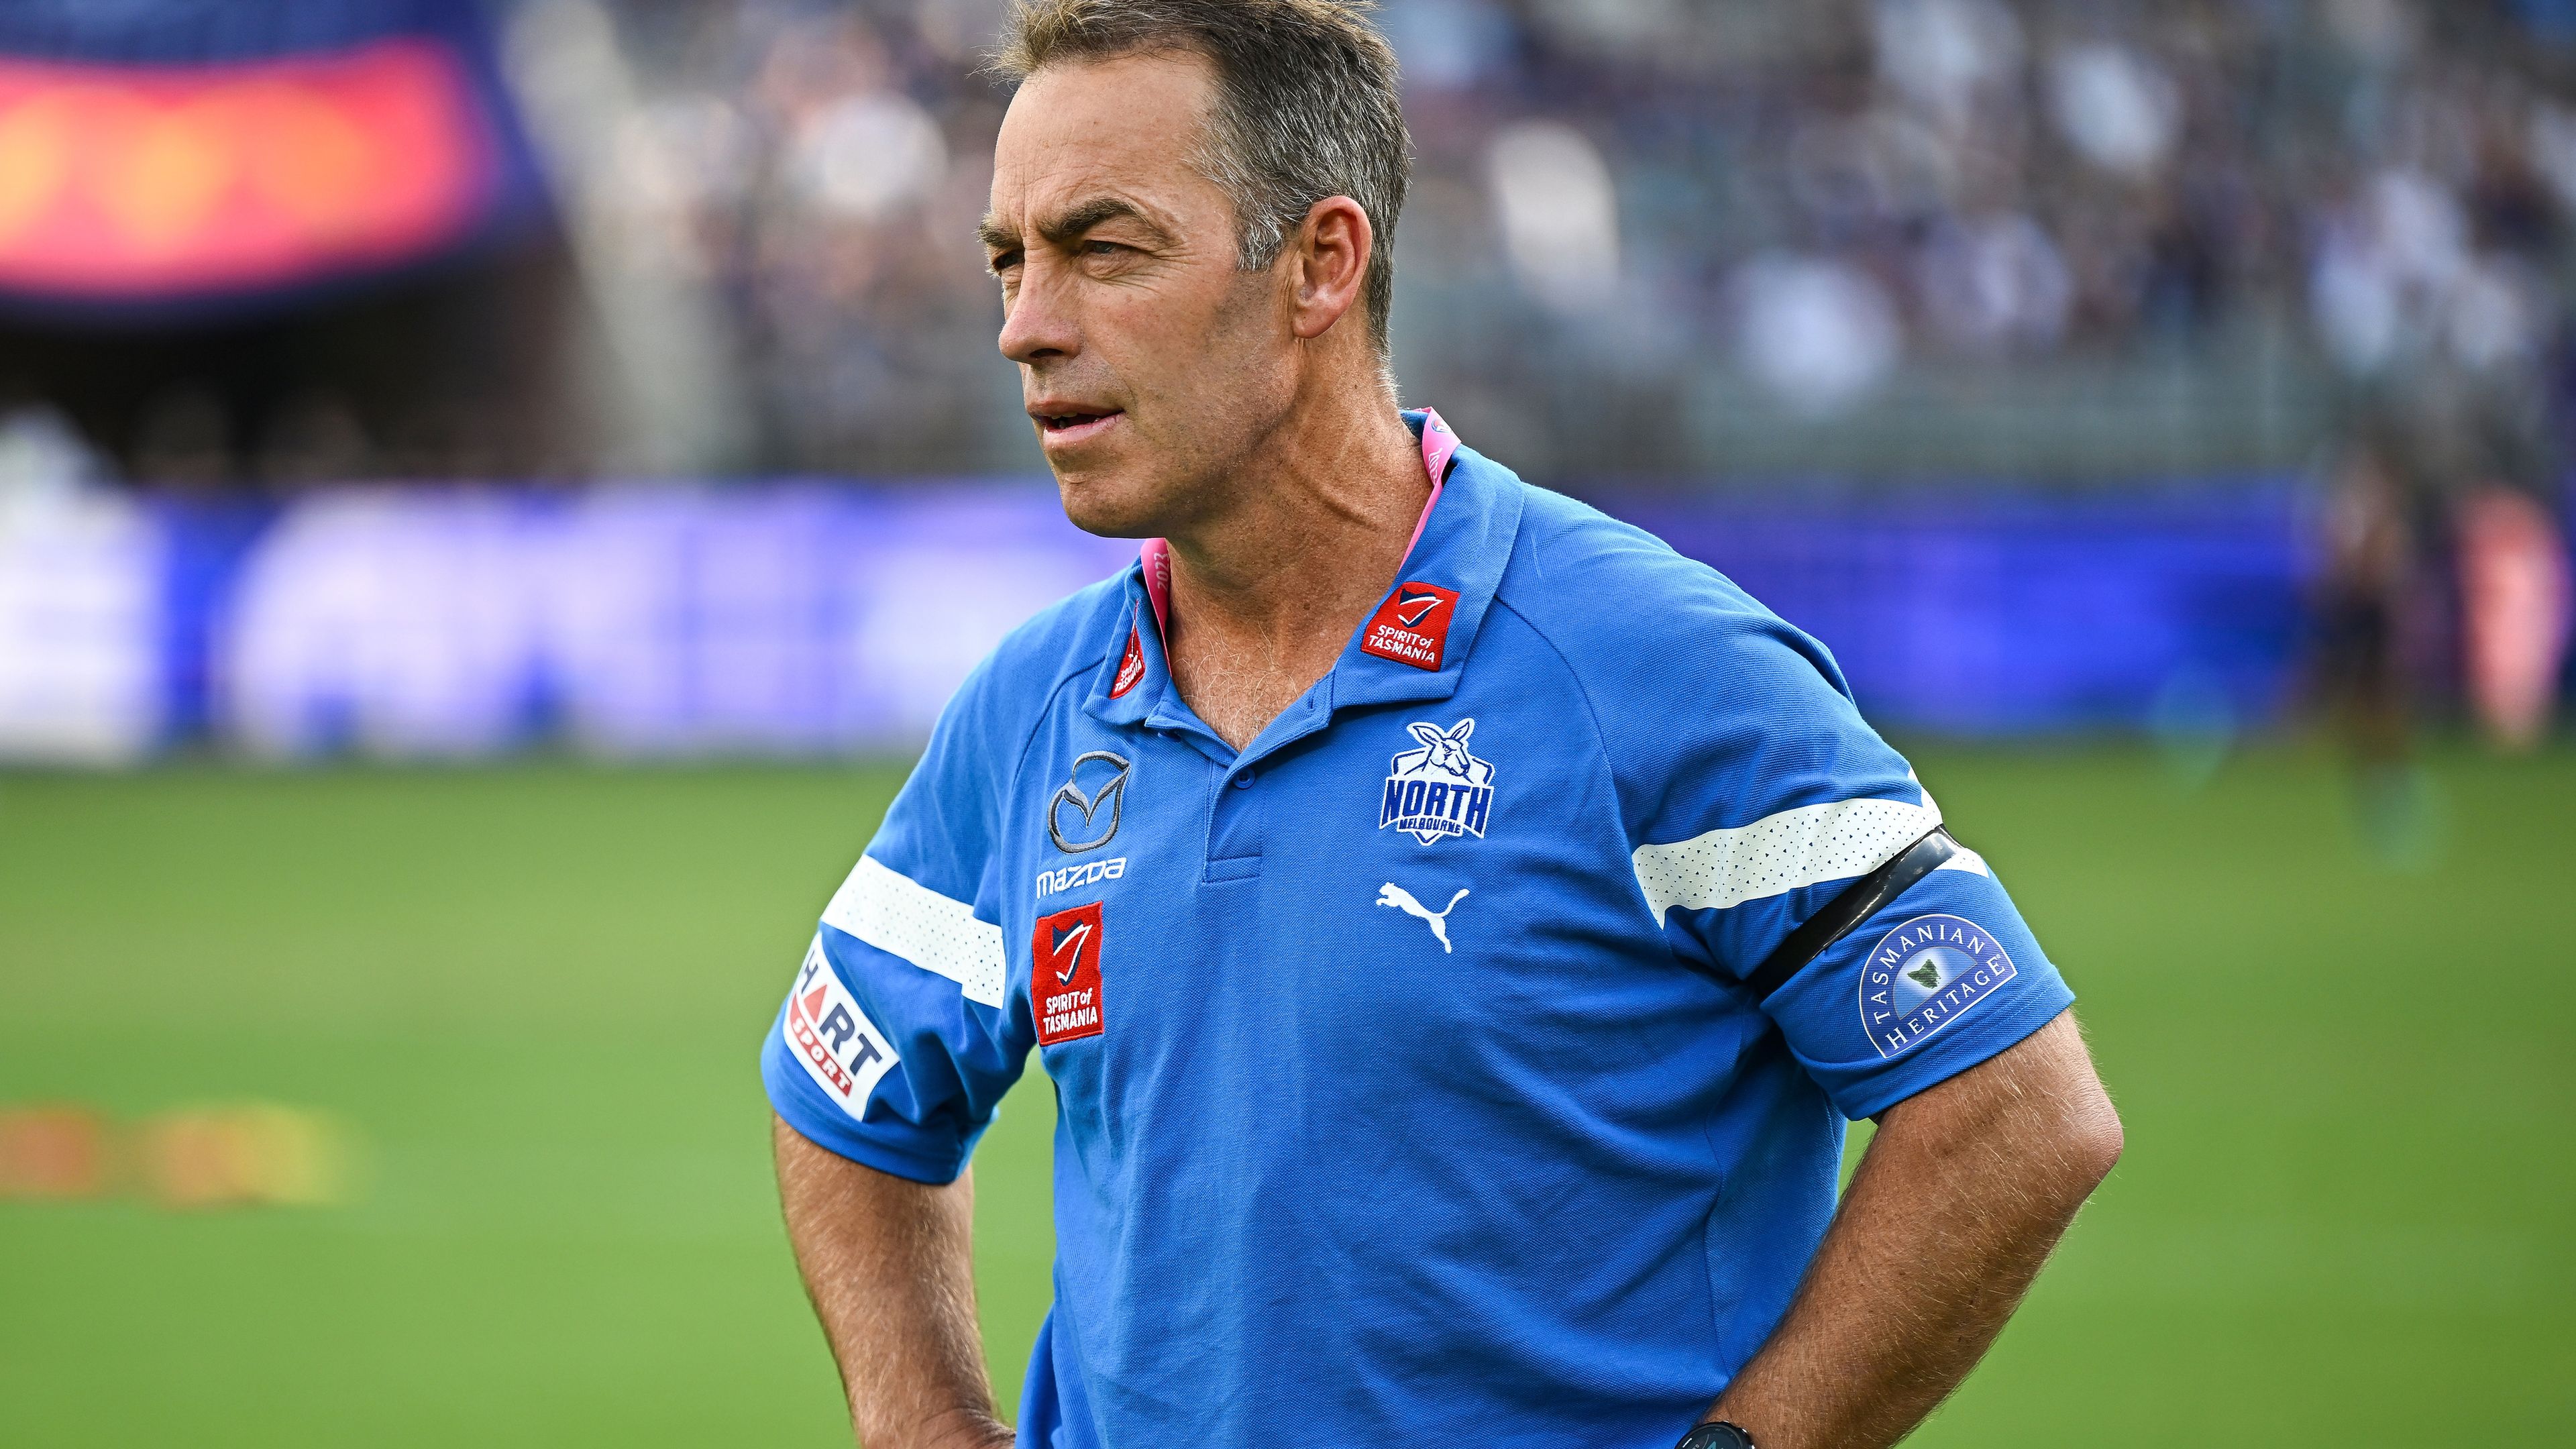 Alastair Clarkson stands down 'indefinitely' as North Melbourne coach